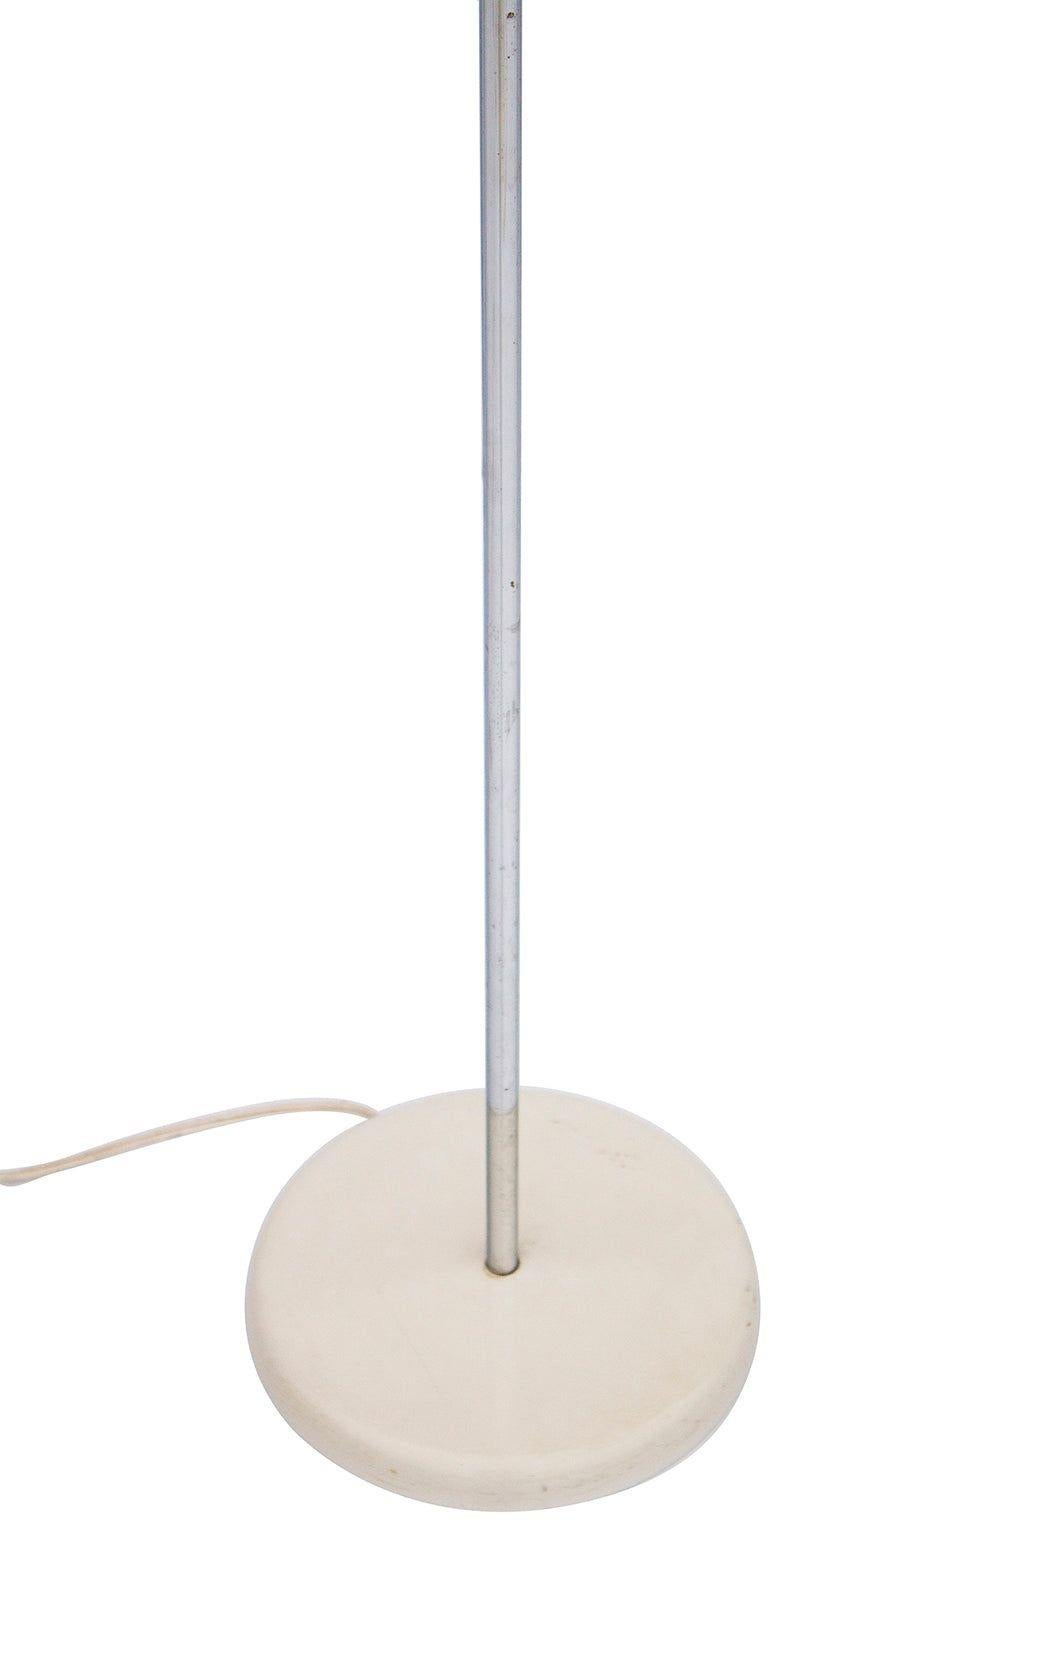 Kovacs Floor Lamp with Round White Base and Chrome Stem 3